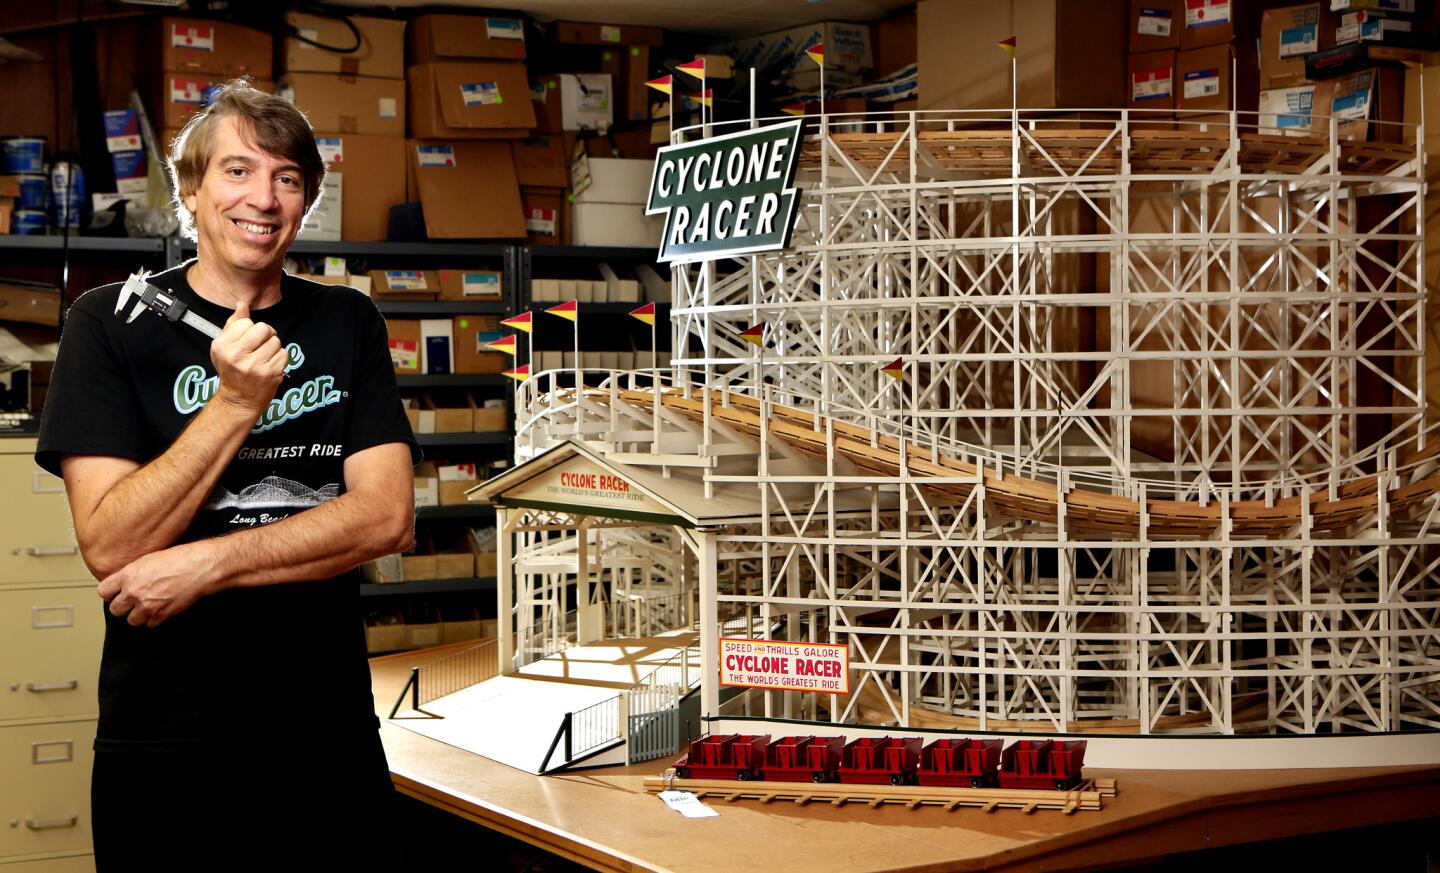 After extensive research, Larry Osterhoudt meticulously built a 1:15 scale model of the entrance to the Cyclone Racer at his home in Downey.